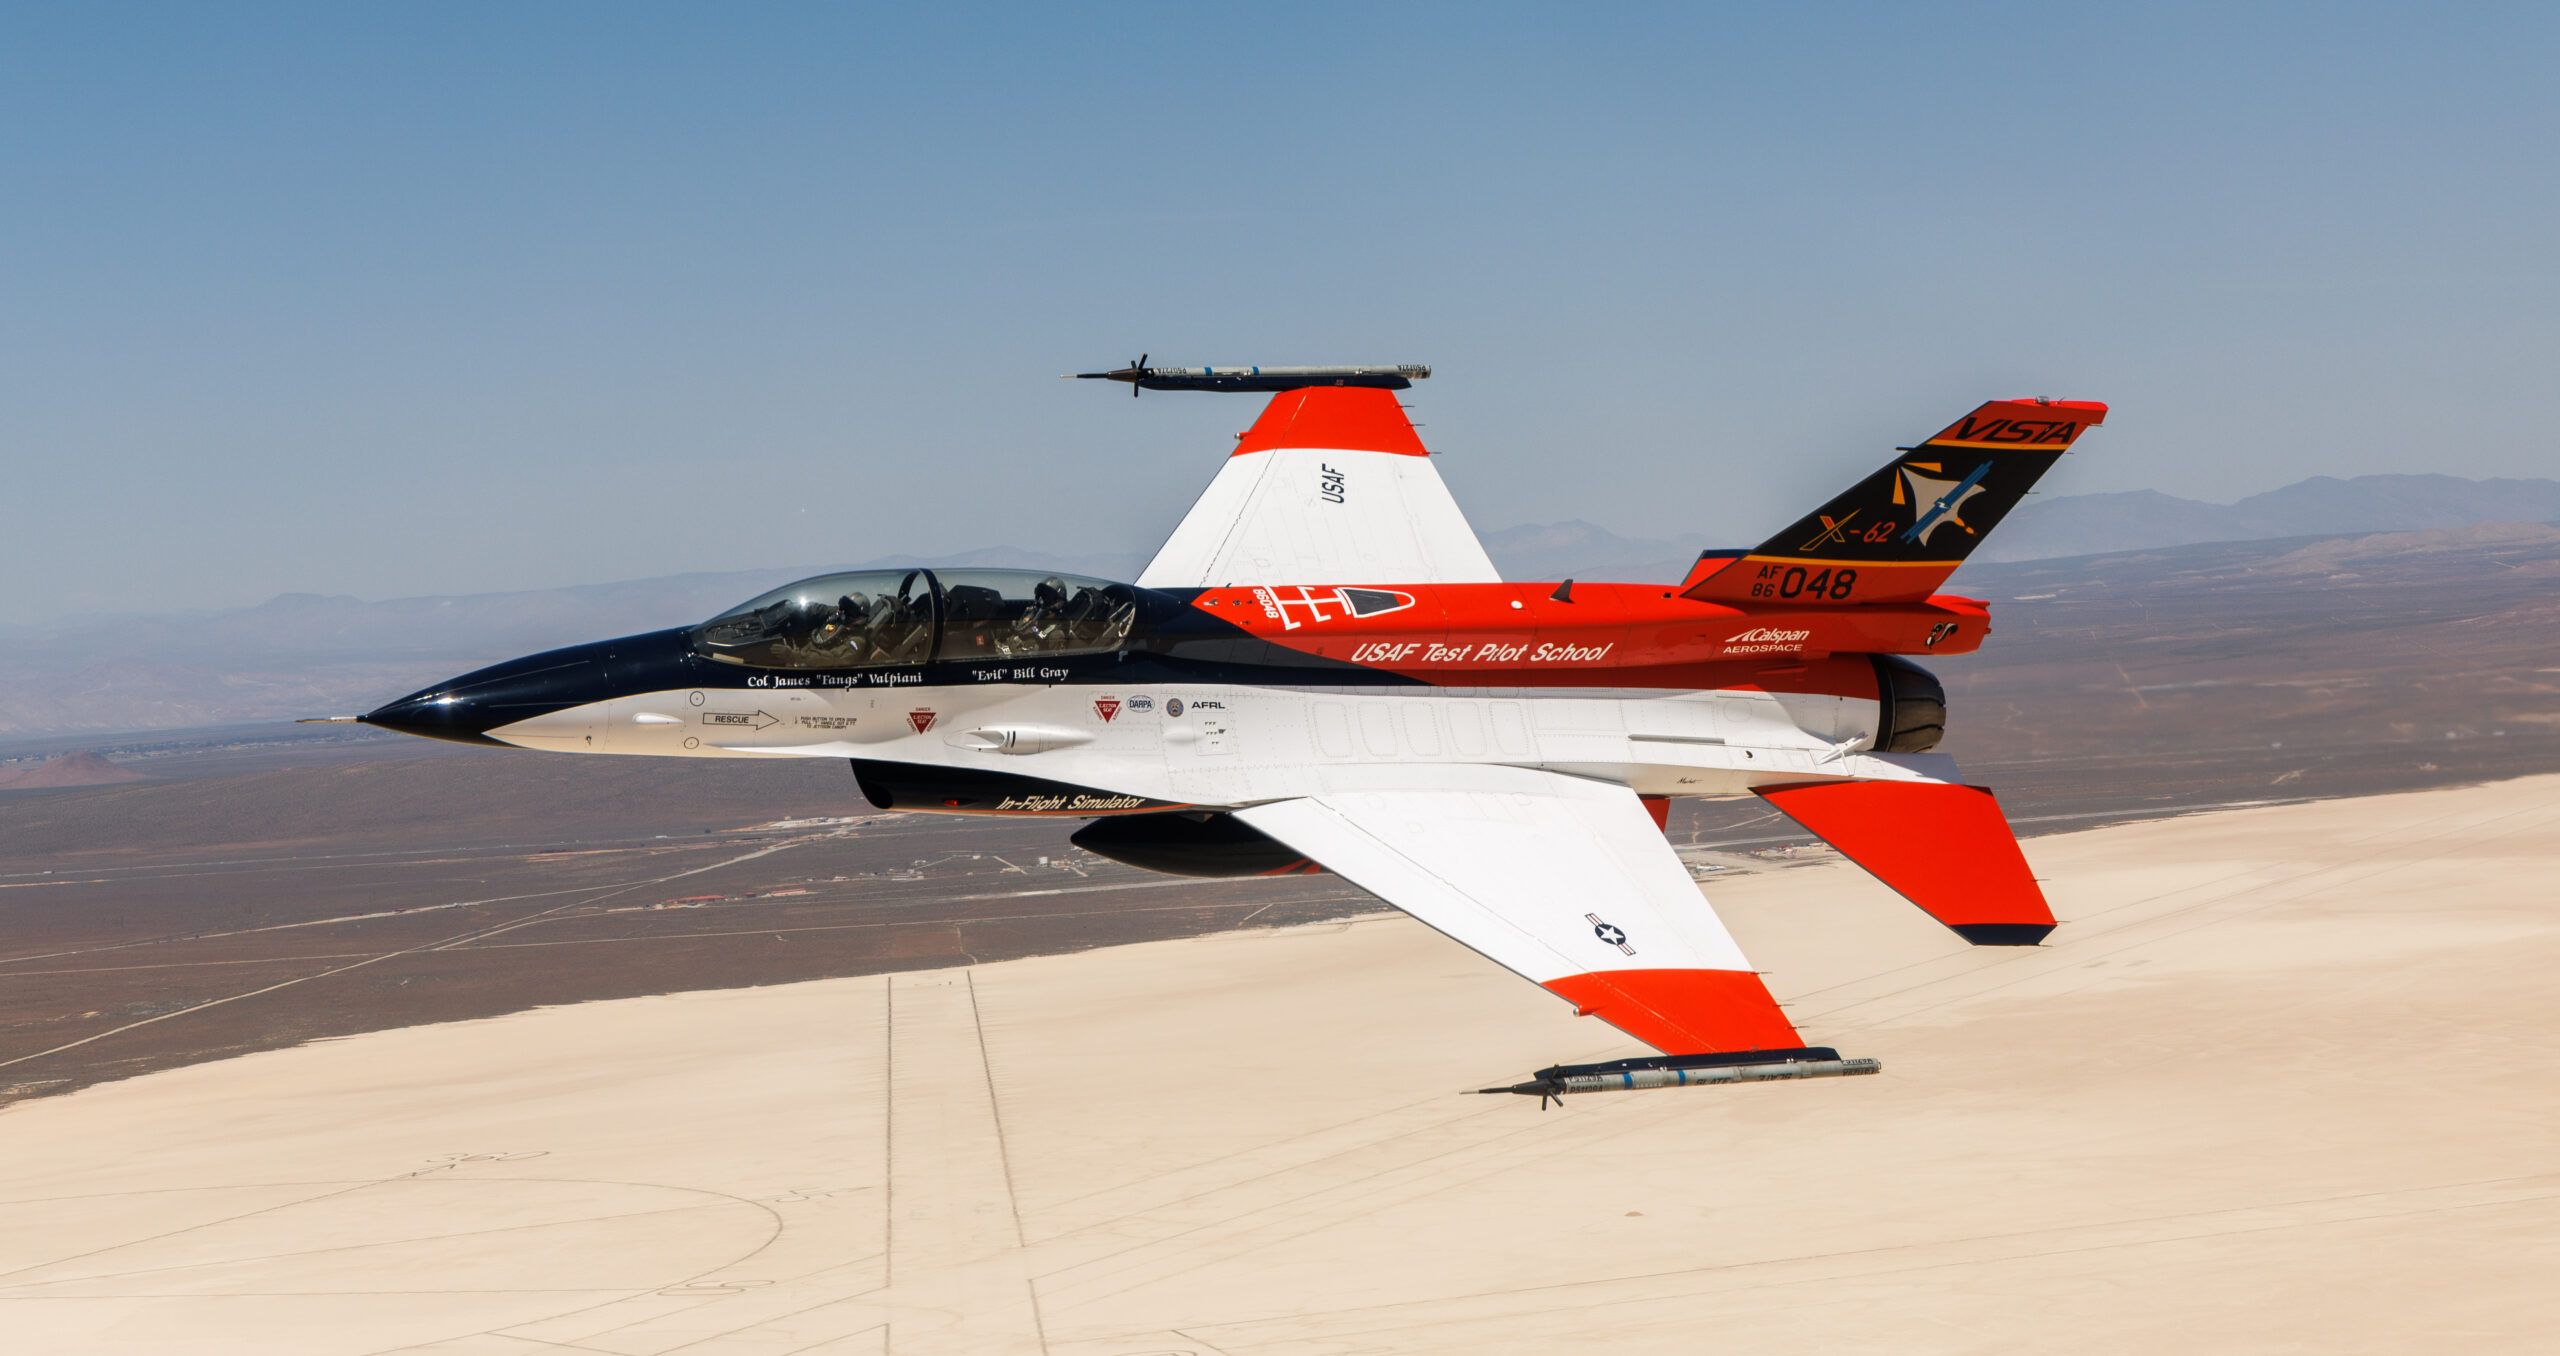 Secretary of the Air Force Frank Kendall flies in the X-62 VISTA in the skies above Edwards Air Force Base, California, May 2. The experimental plane was flown by an AI-powered system without input from Kendall or a safety pilot in the rear seat. Air Force photo by Richard Gonzales)